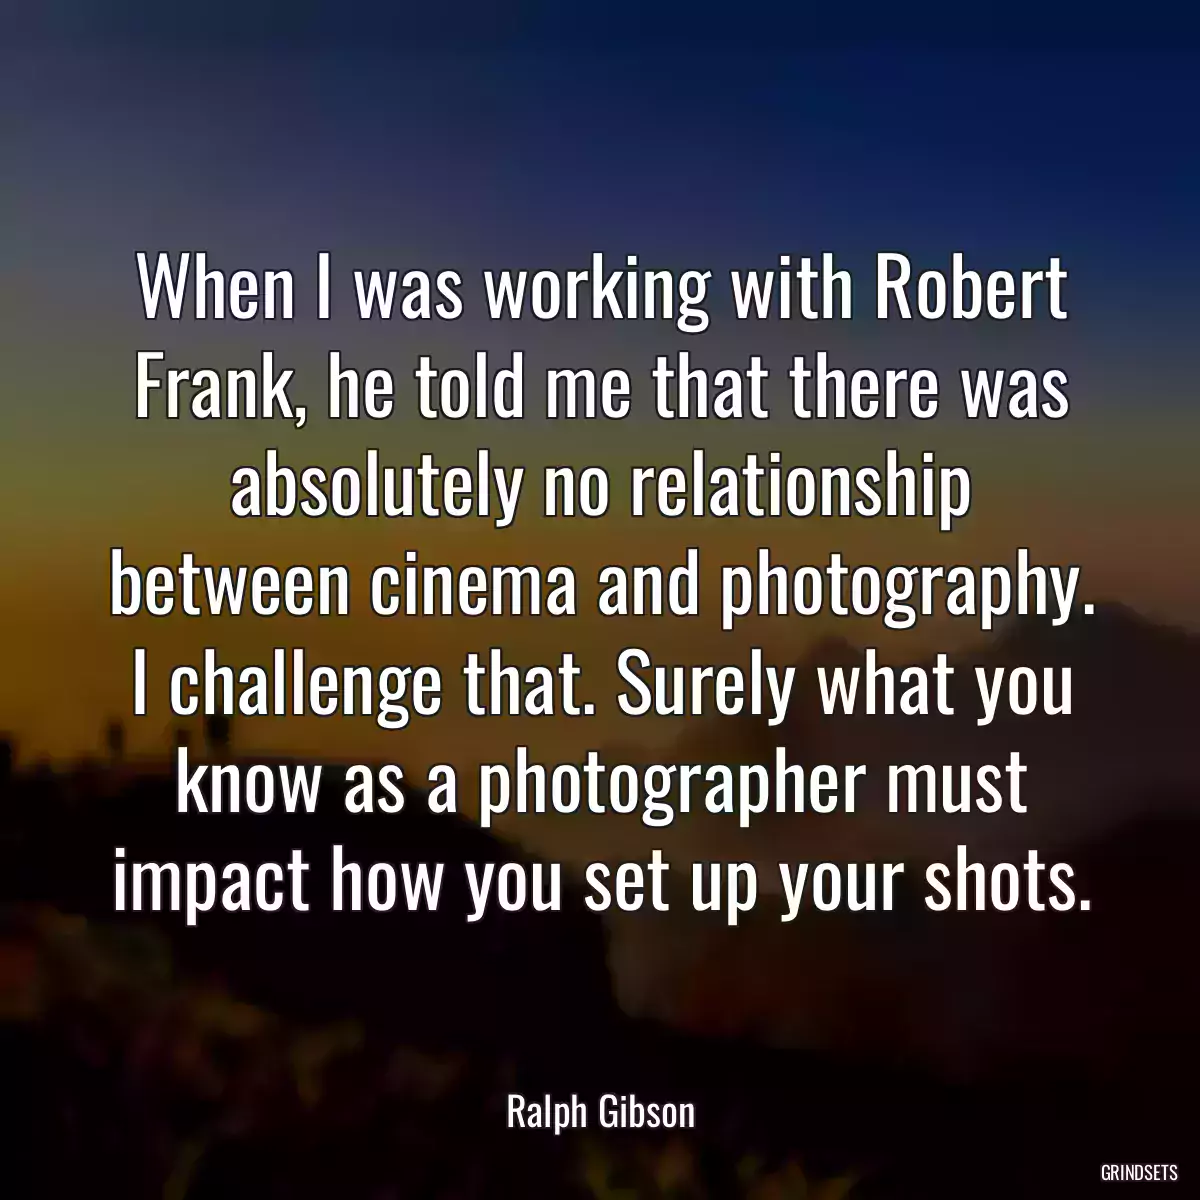 When I was working with Robert Frank, he told me that there was absolutely no relationship between cinema and photography. I challenge that. Surely what you know as a photographer must impact how you set up your shots.